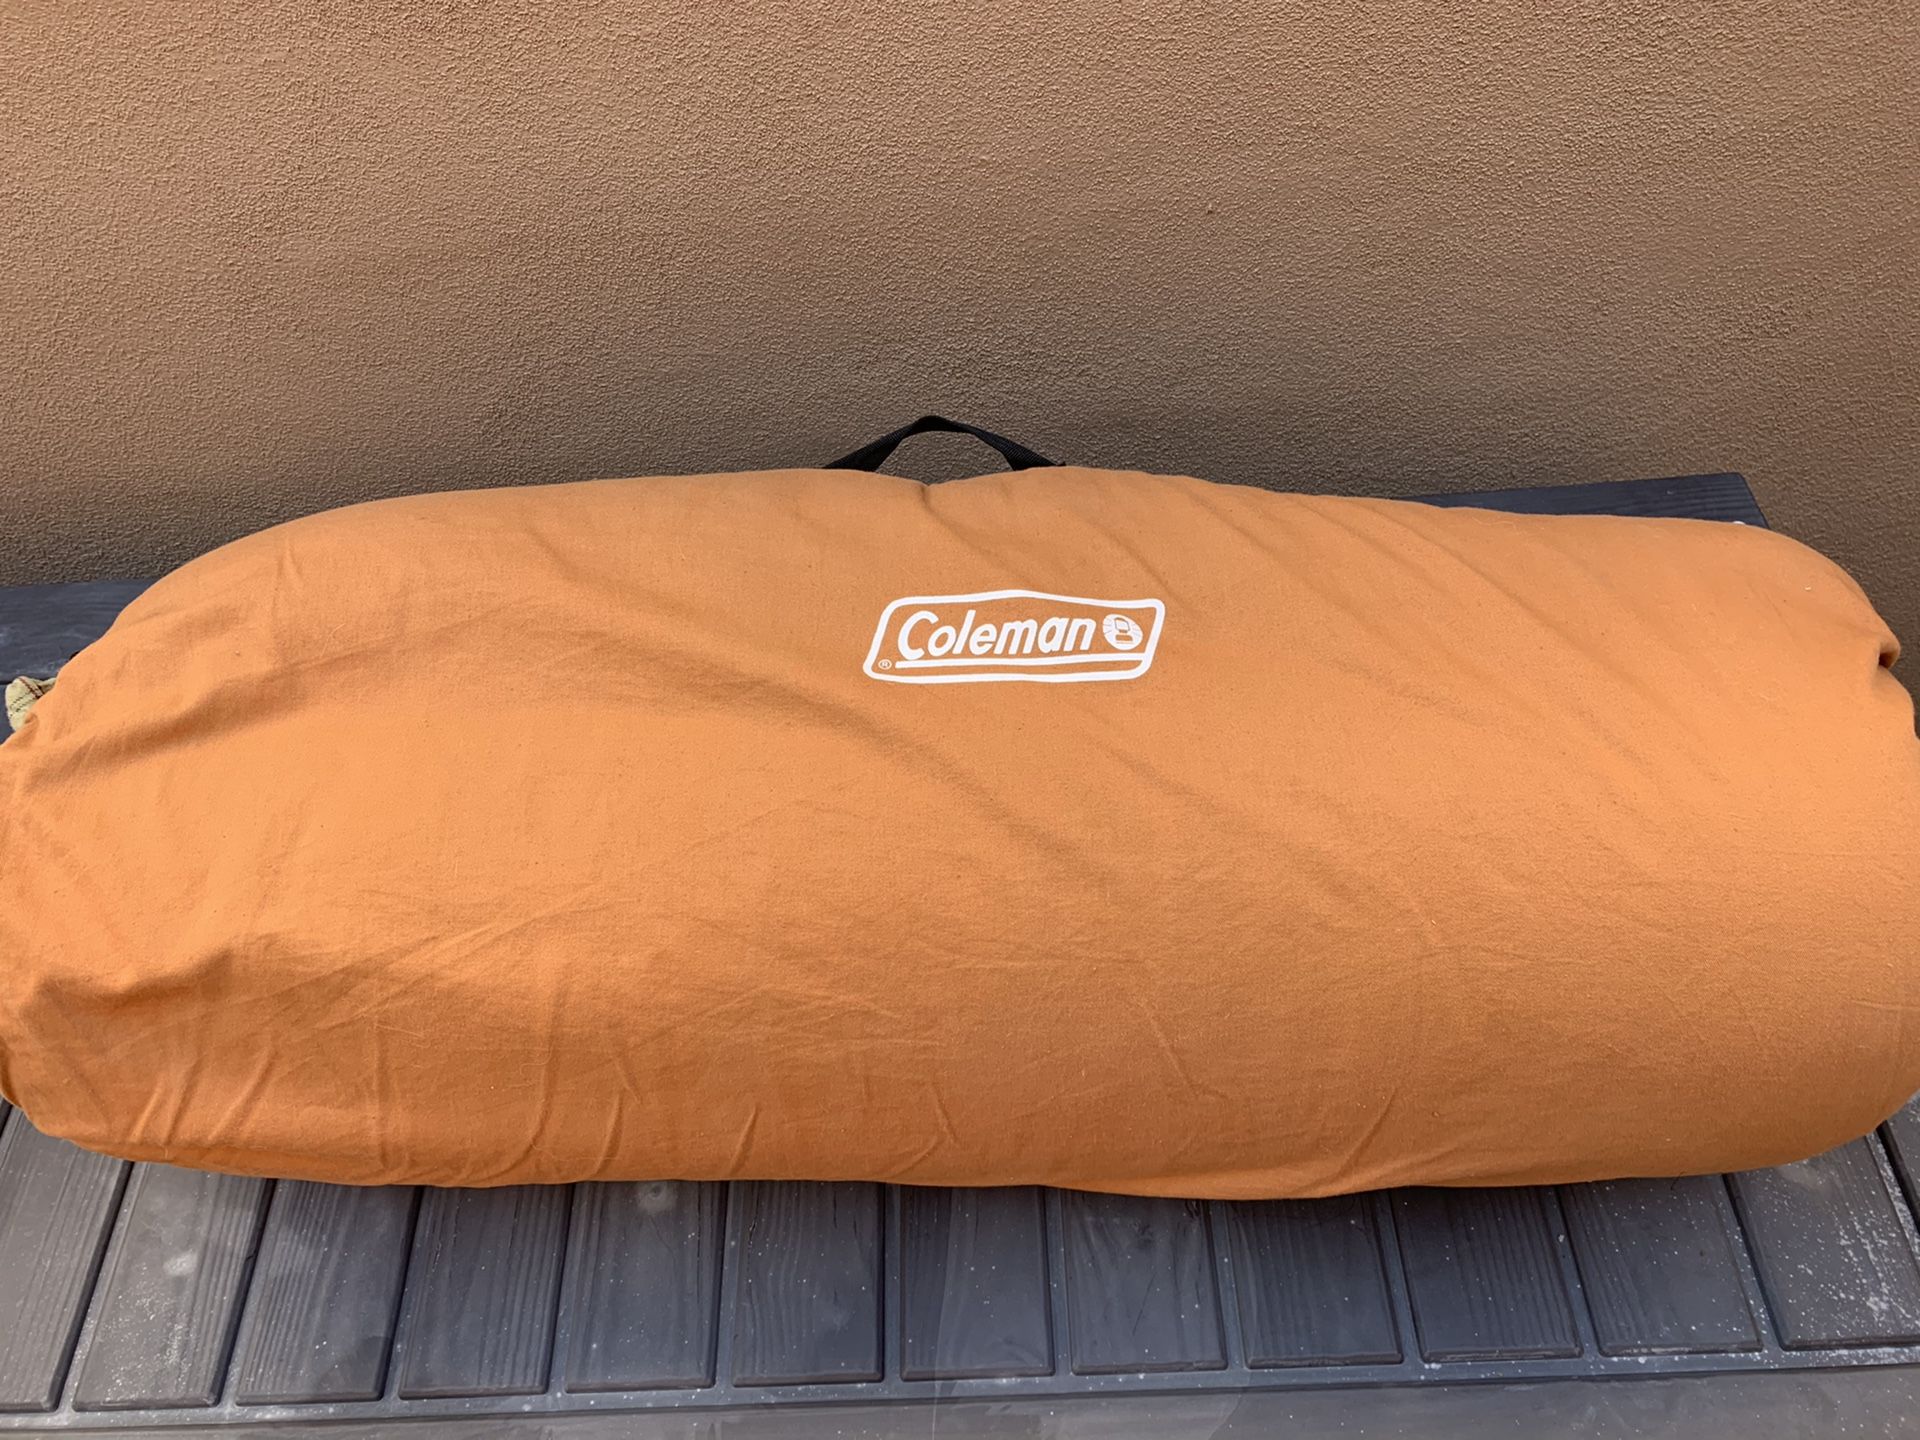 Vintage Coleman Double Sleeping Bag with Flannel Duck Lining - Original Owner gently used- can make two single sleeping bags, or attach for double!